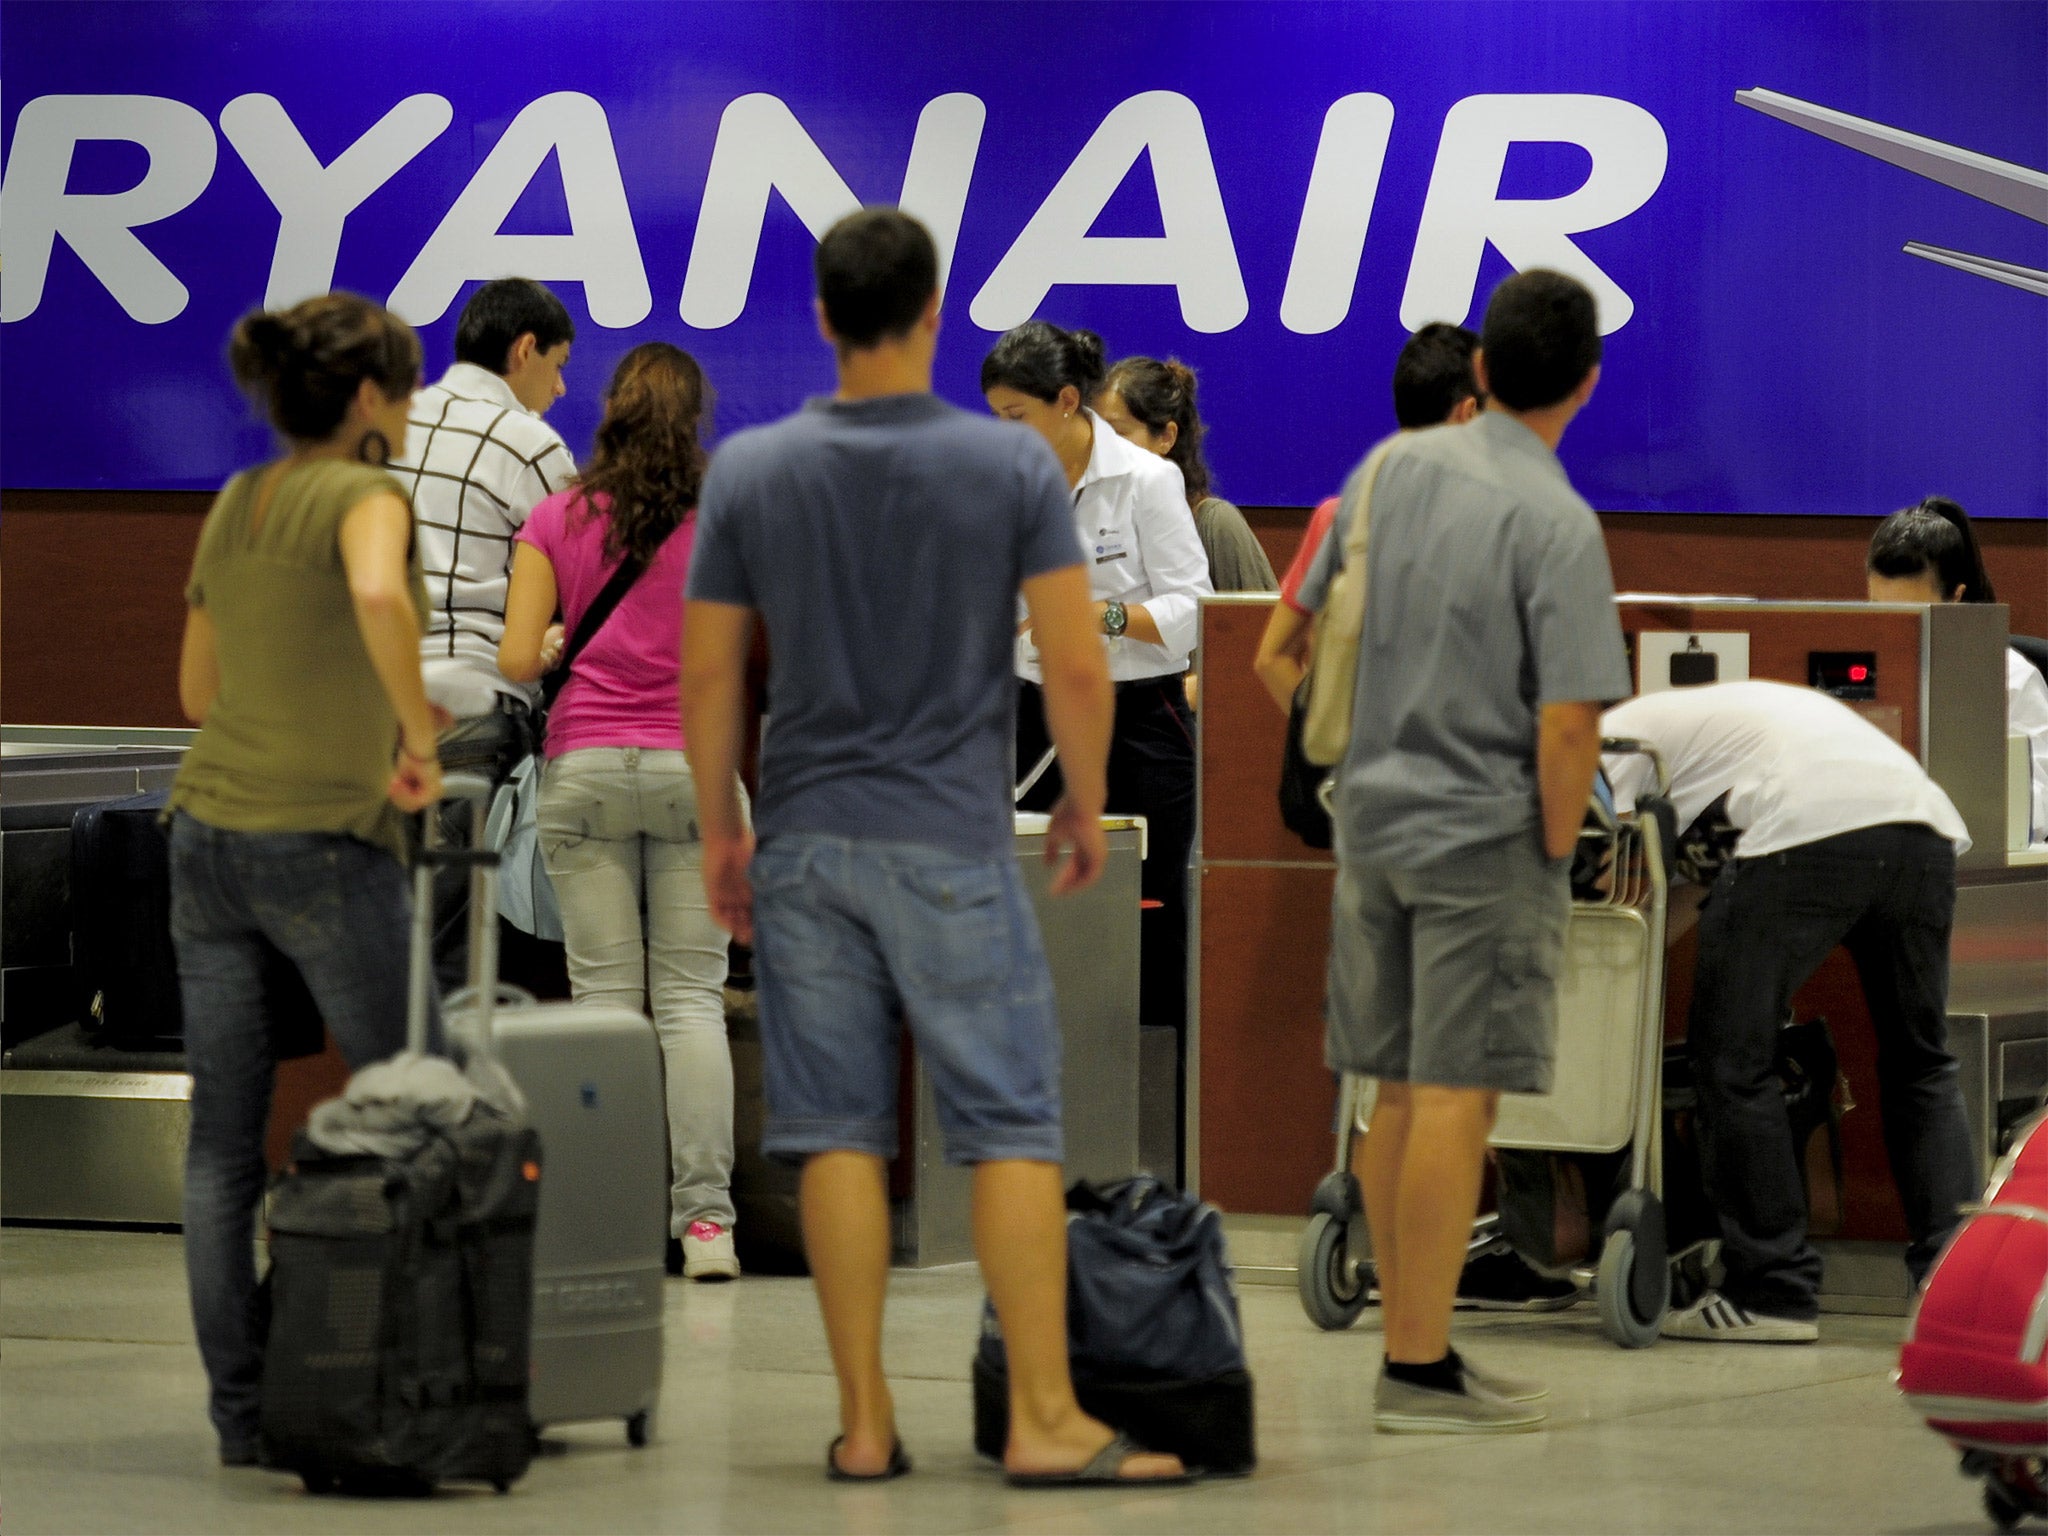 Ryanair appears to be luring previously reluctant passengers